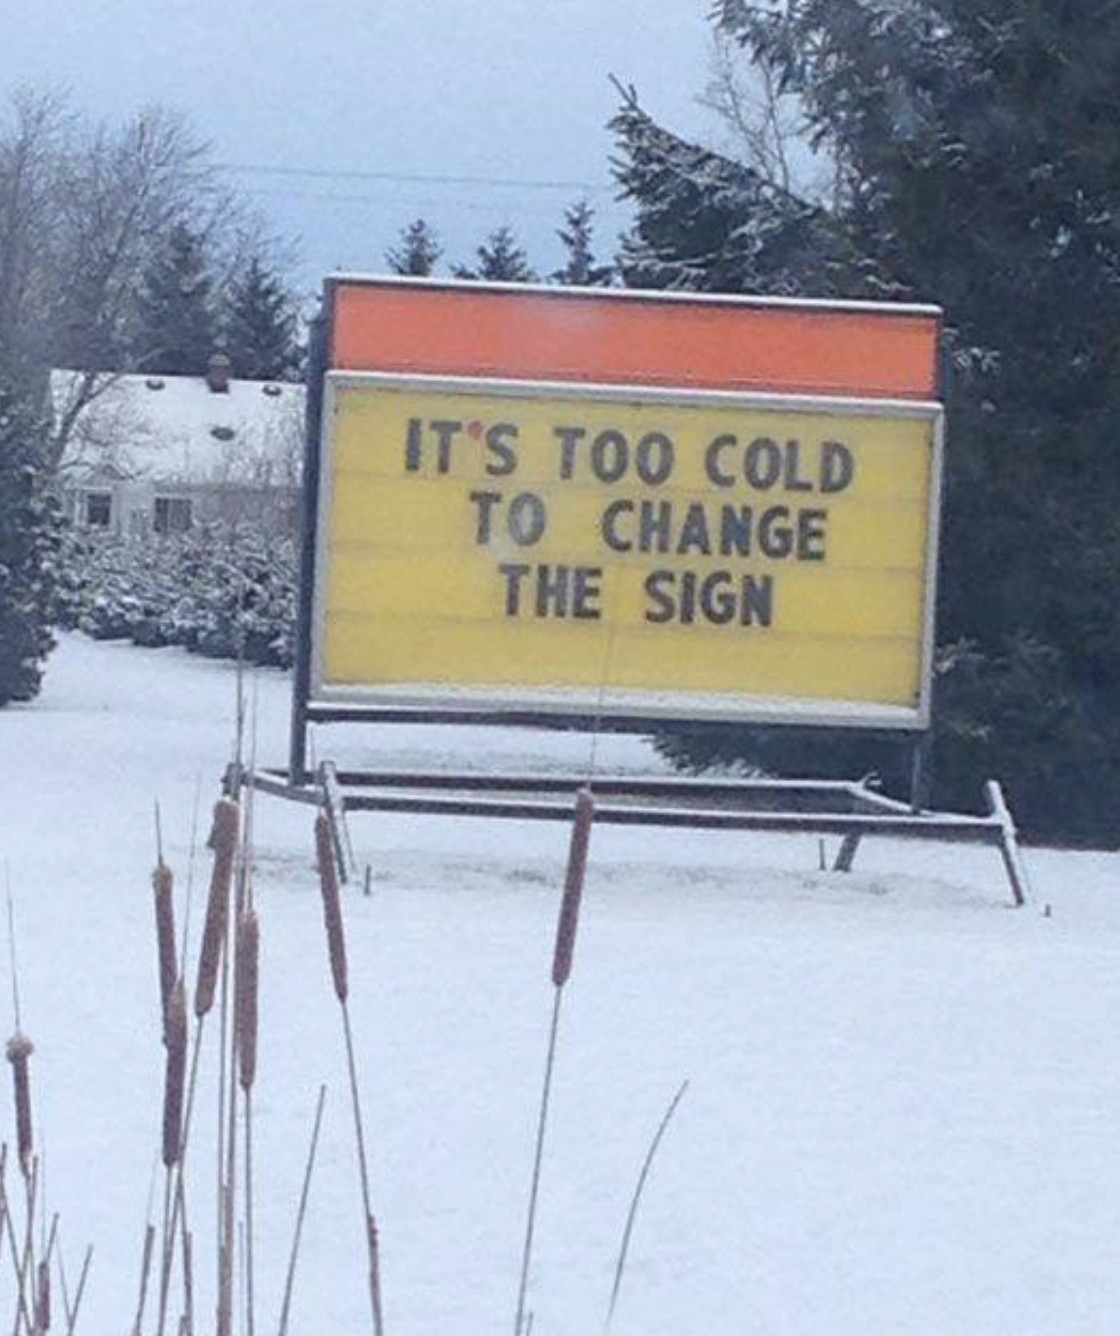 &quot;It&#x27;s too cold to change the sign&quot; in the middle of a snowy scene